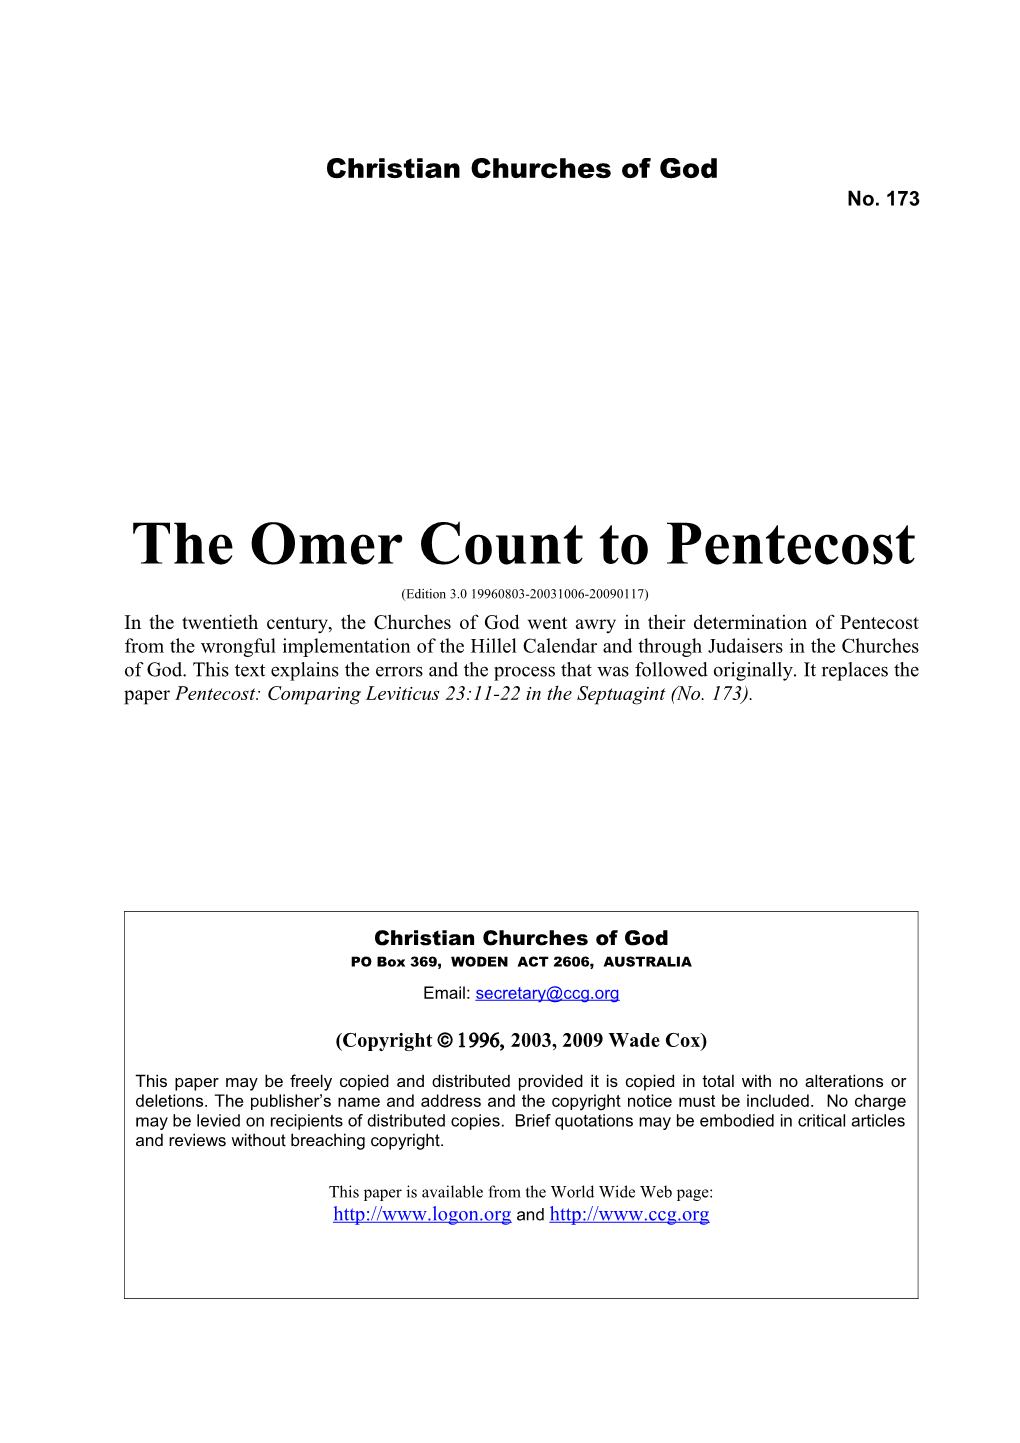 The Omer Count to Pentecost (No. 173)